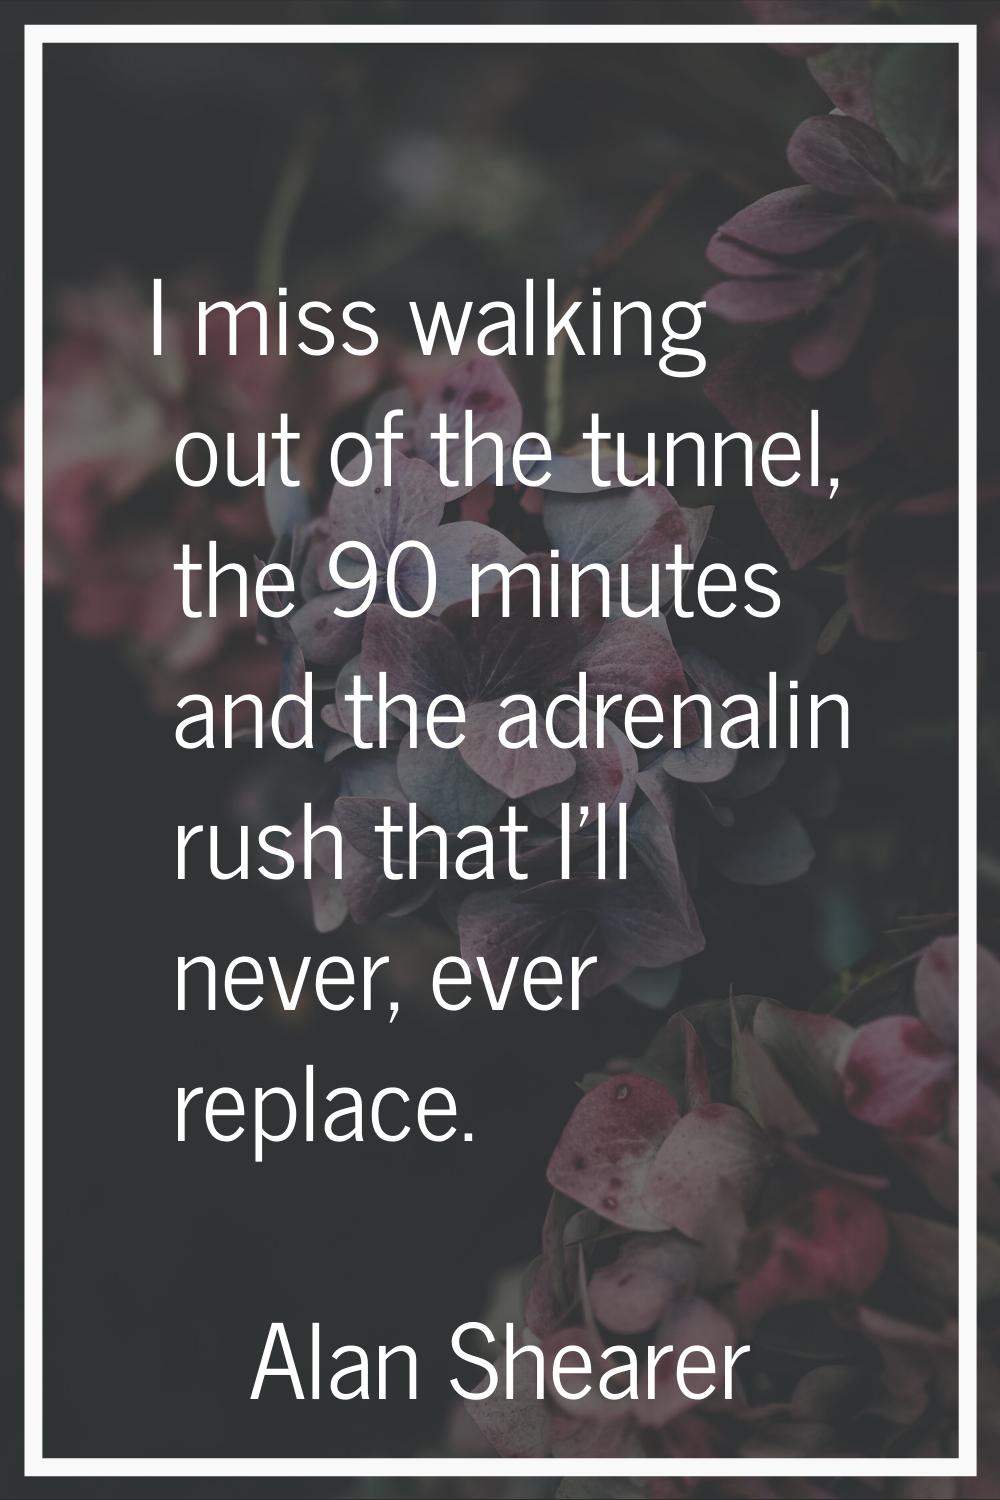 I miss walking out of the tunnel, the 90 minutes and the adrenalin rush that I'll never, ever repla